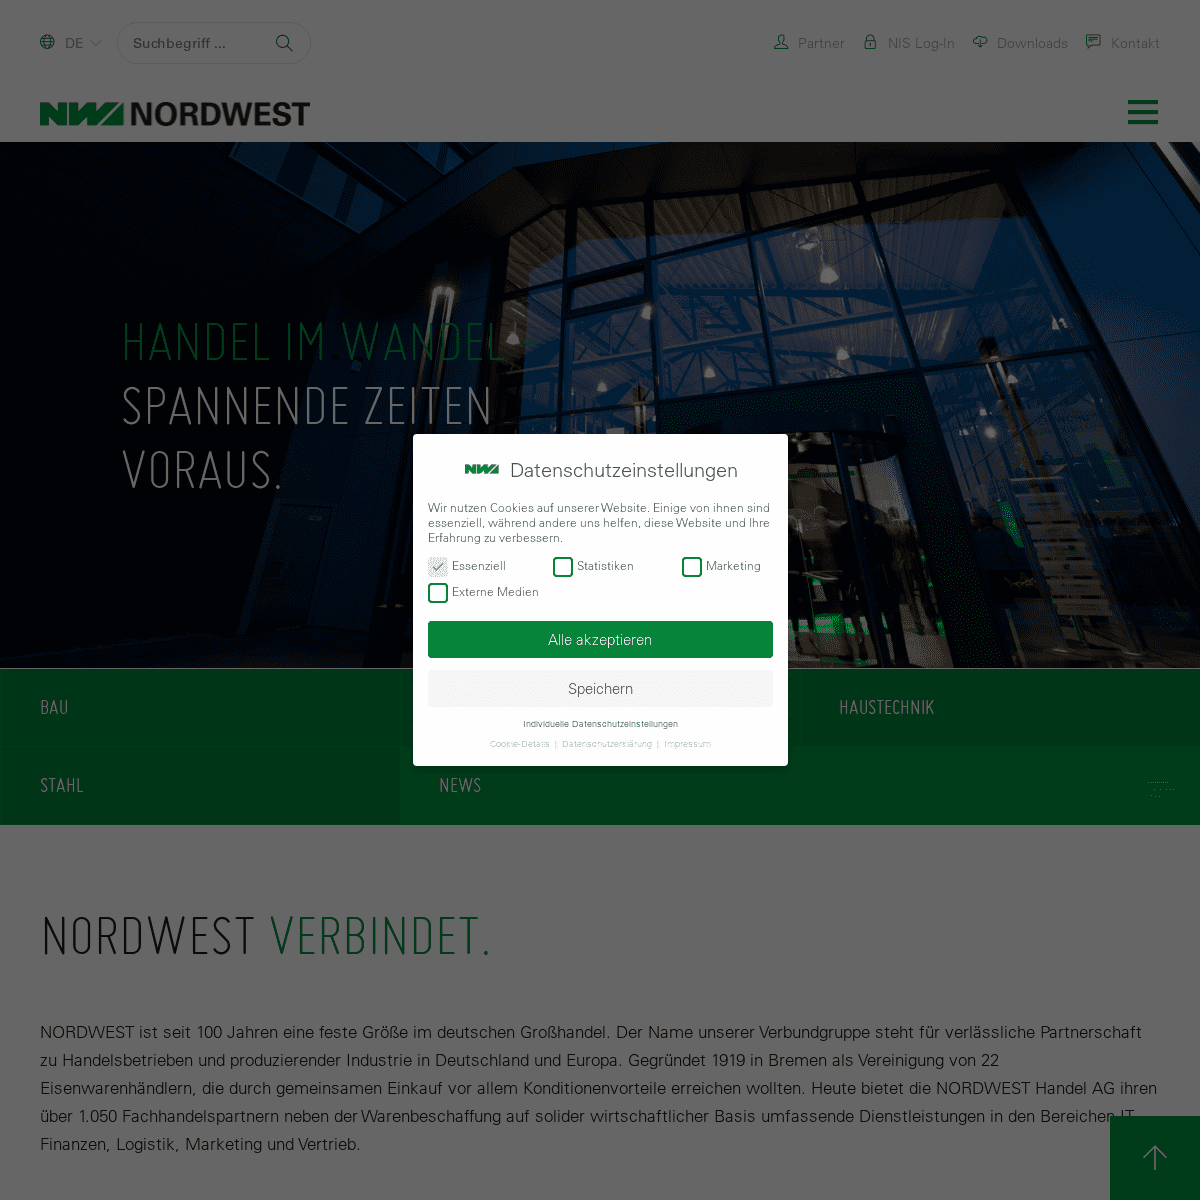 A complete backup of https://nordwest.com